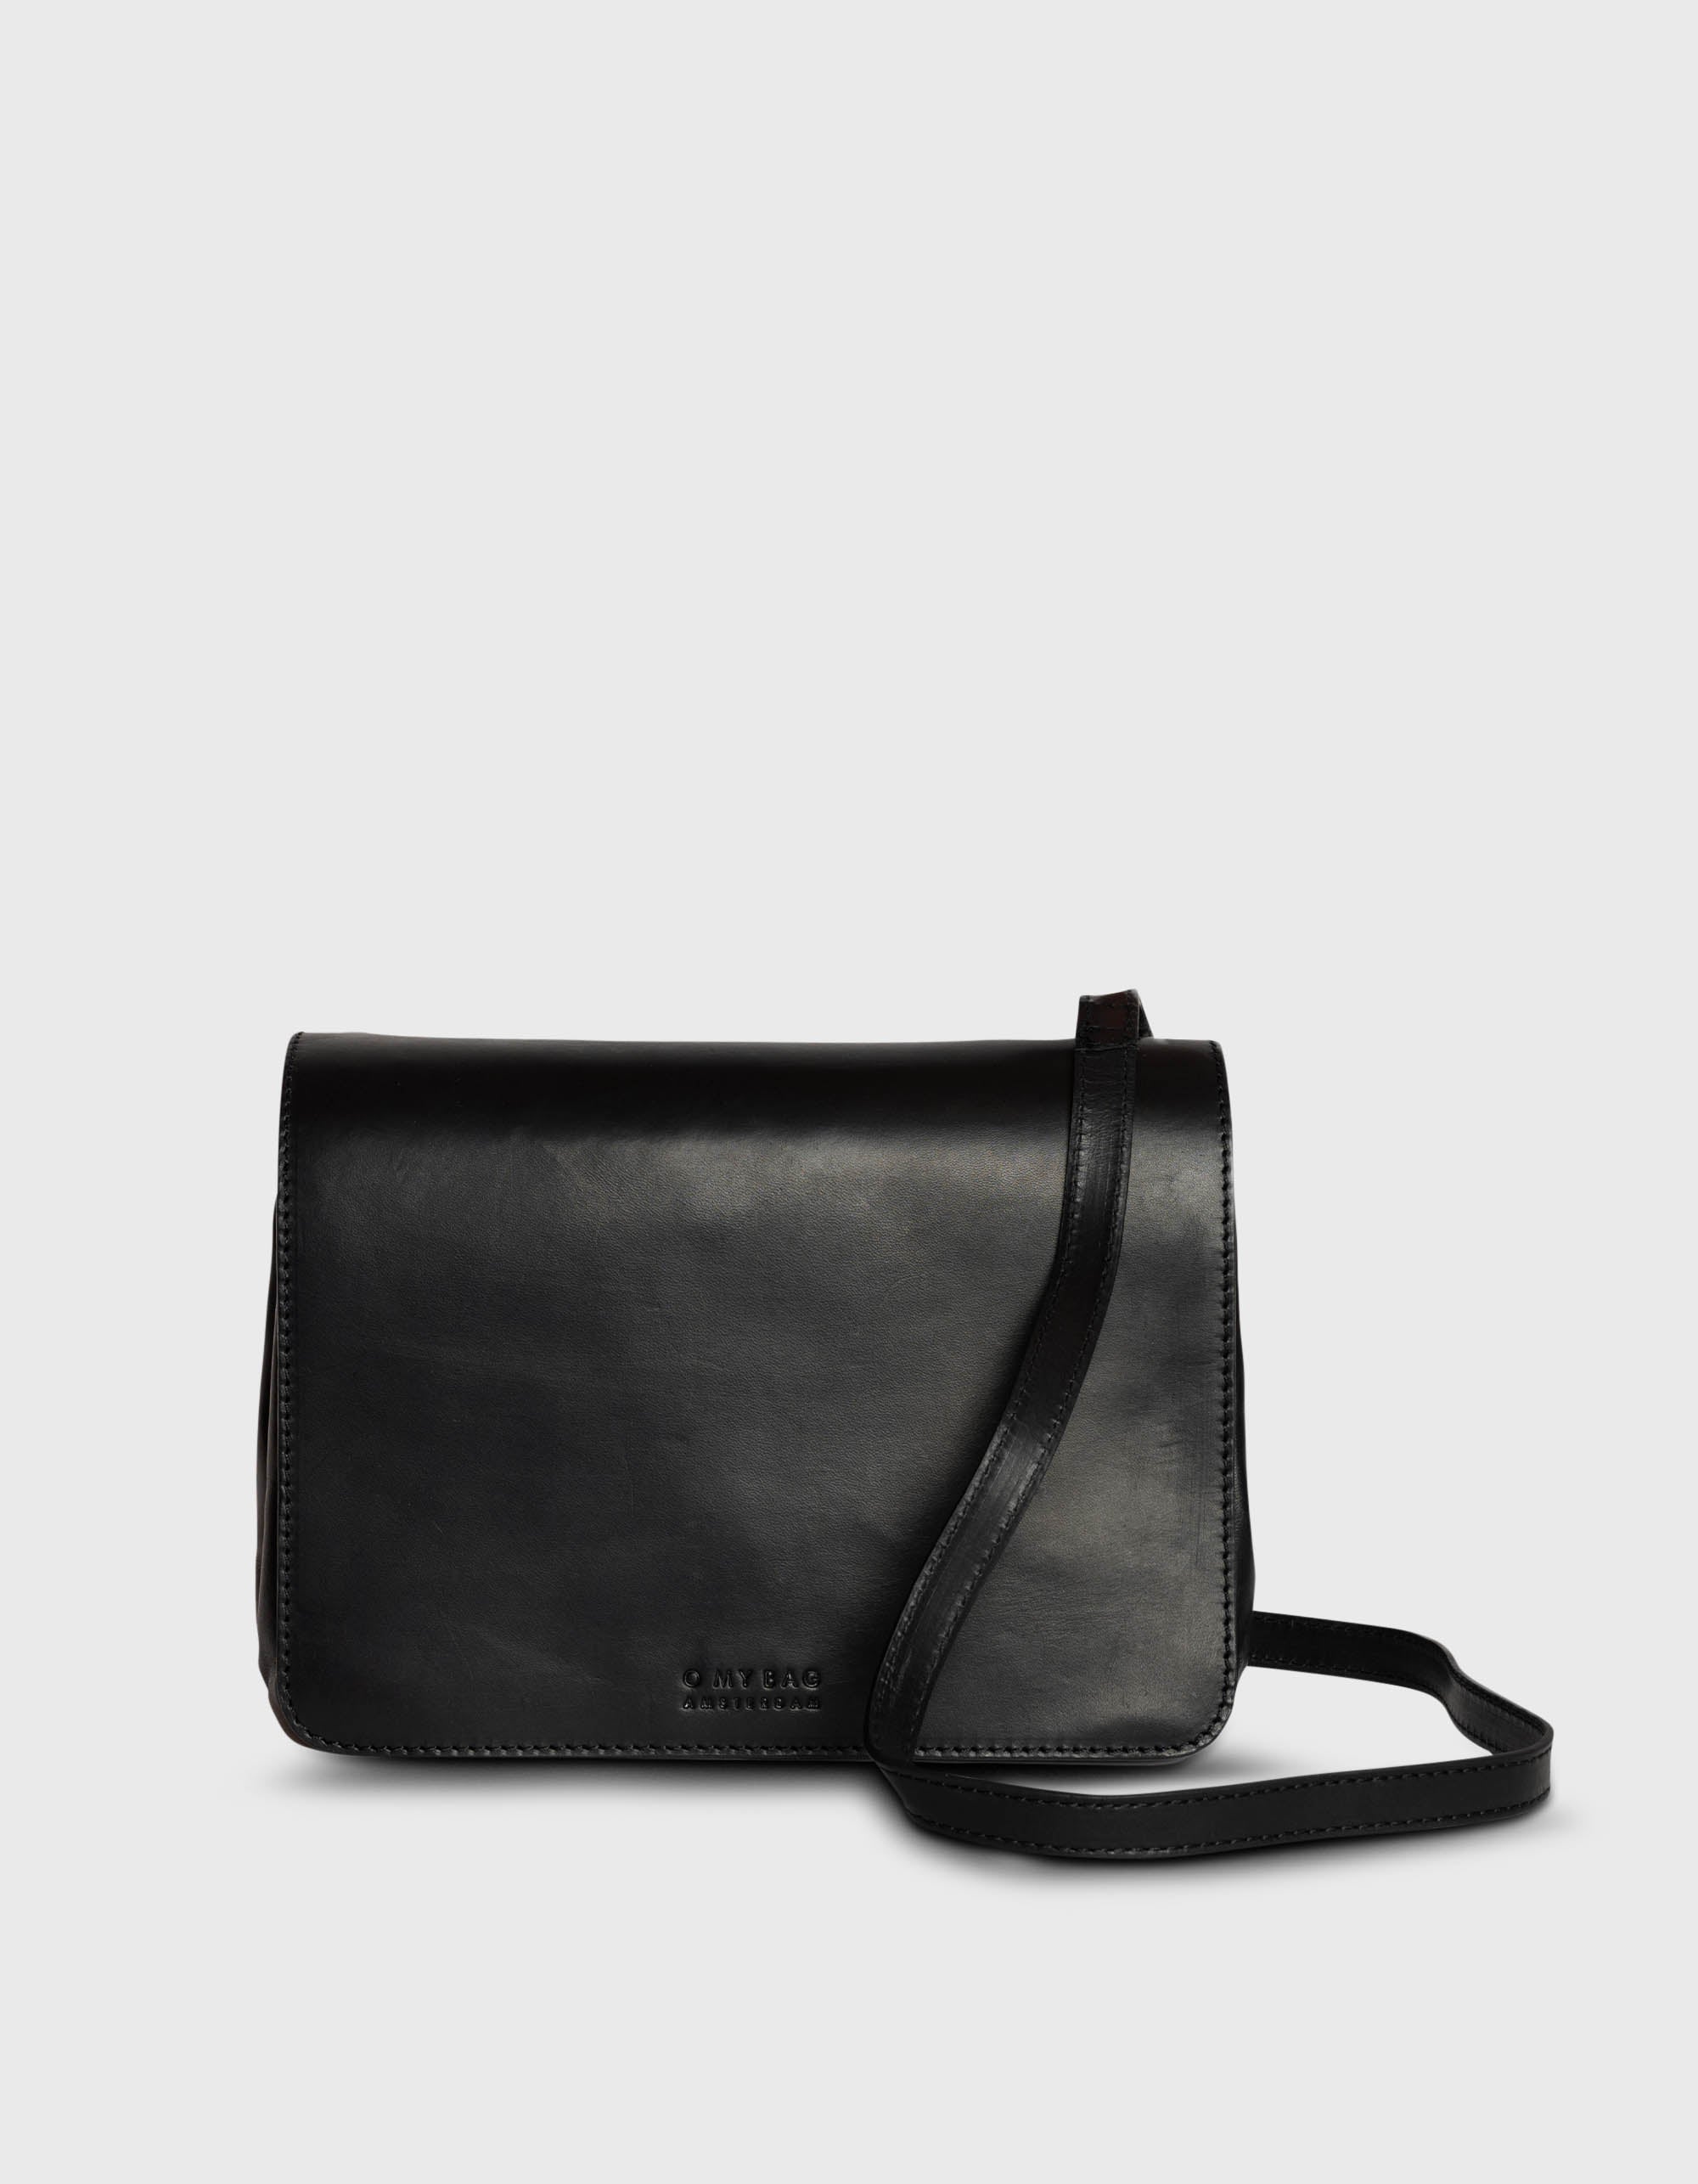 The Lucy | Classic Leather